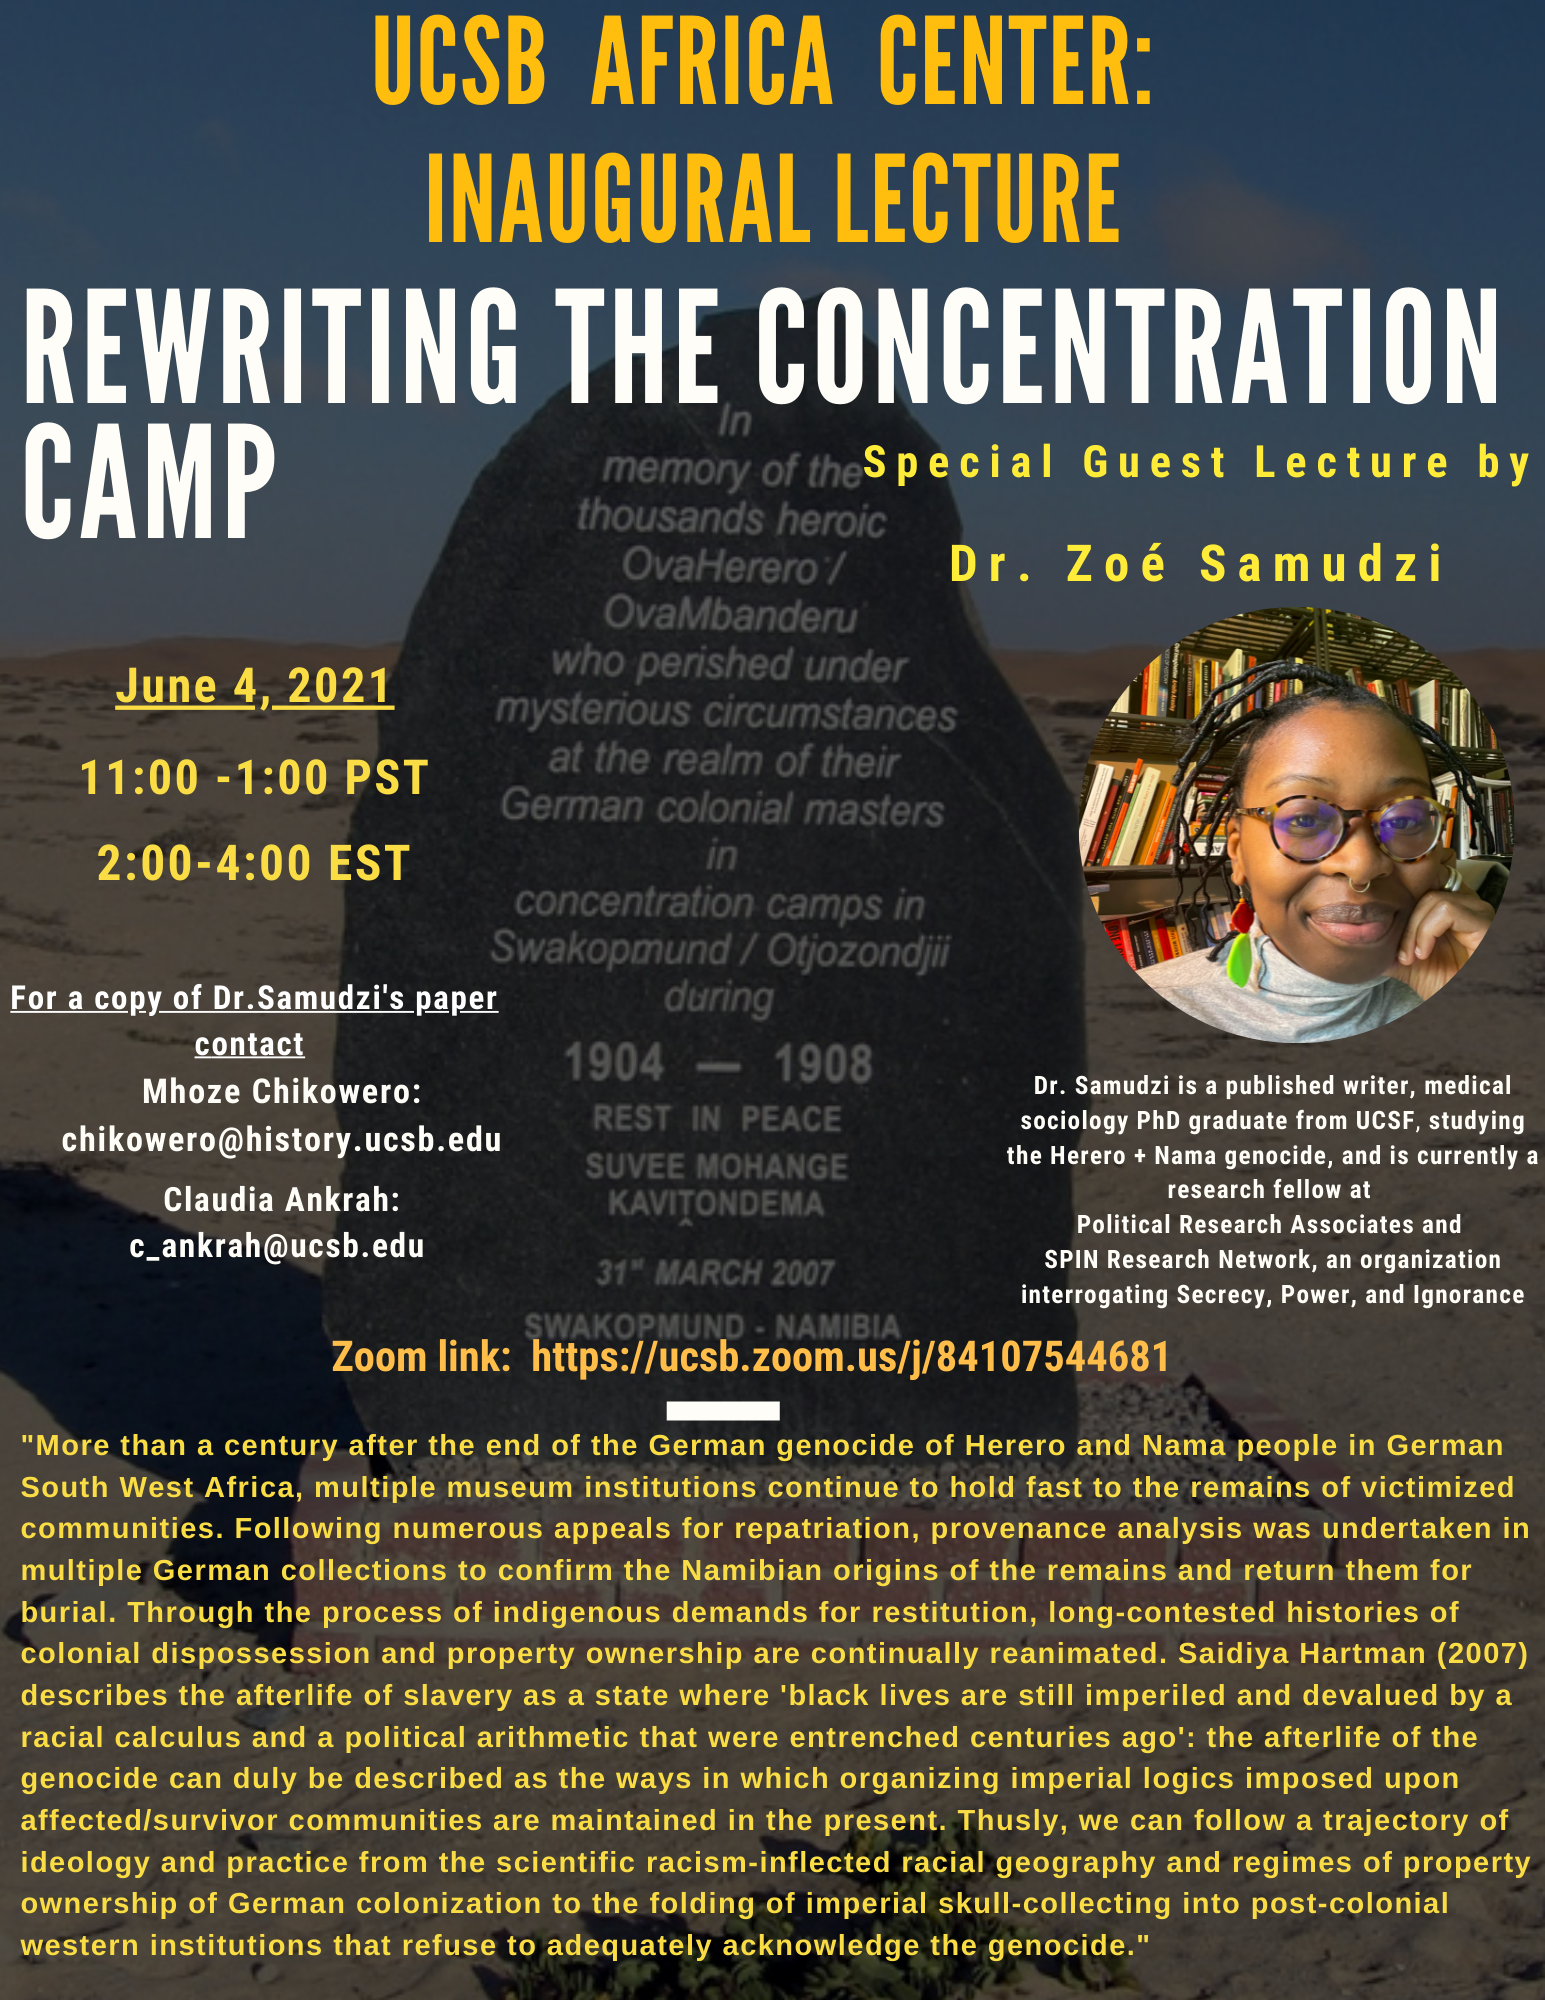 Flyer for Zoom Lecture Rewriting the Concentration Camp by UCSB Africa Center: Inaugural Lecture on 6/4/21 at 11AM-1PM PST